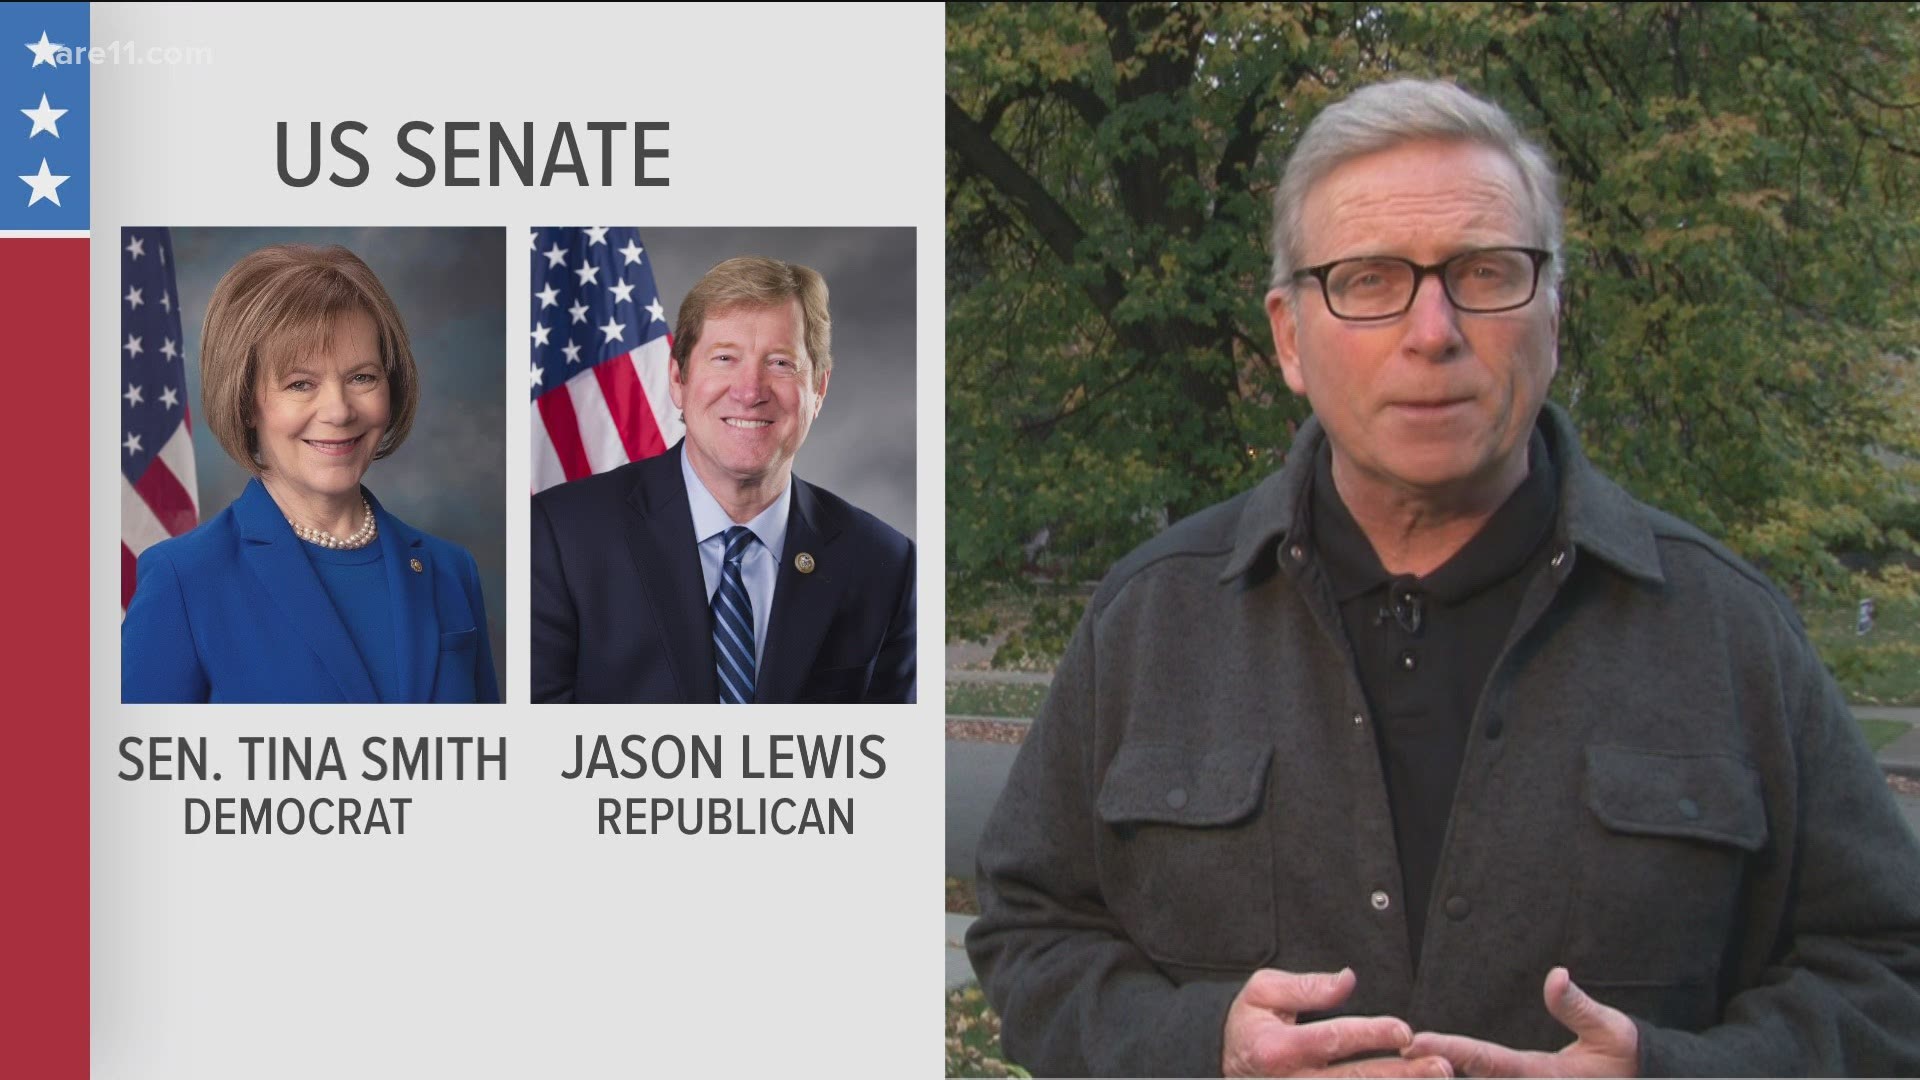 There's a huge race between Sen. Tina Smith and and her Republican opponent, former U.S. Rep. Jason Lewis. We look at their policies and records